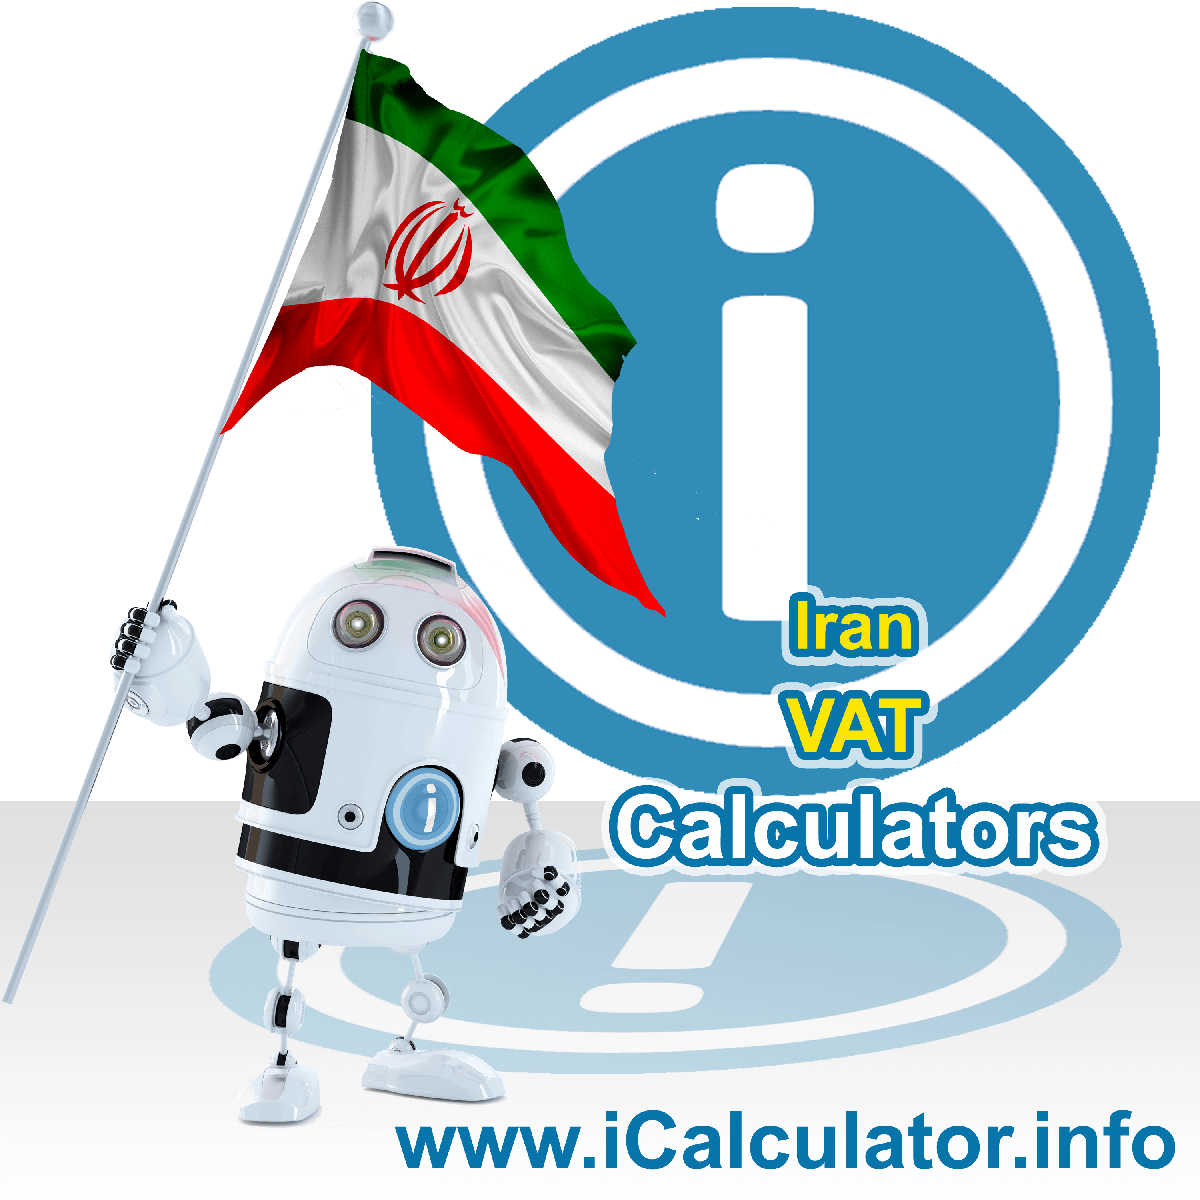 Iran VAT Calculator. This image shows the Iran flag and information relating to the VAT formula used for calculating Value Added Tax in Iran using the Iran VAT Calculator in 2023